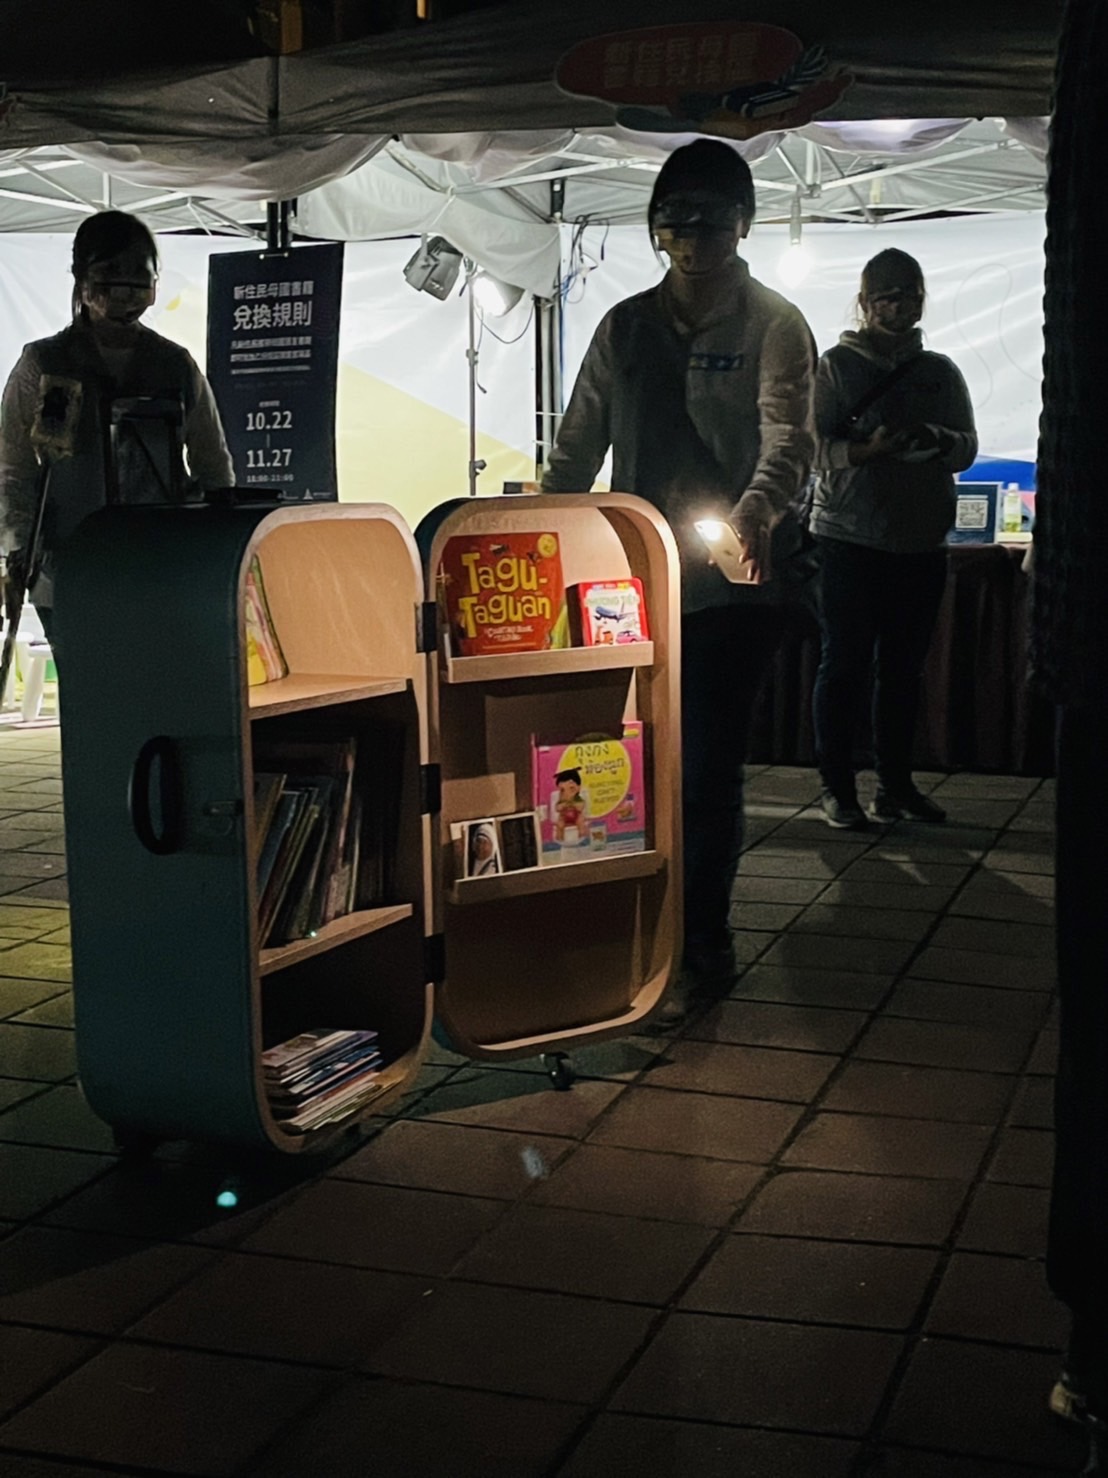 New immigrants’ book boxes are set up at the site, and the public can read the books of the for free and get souvenirs. (Photo / Provided by the NIA)